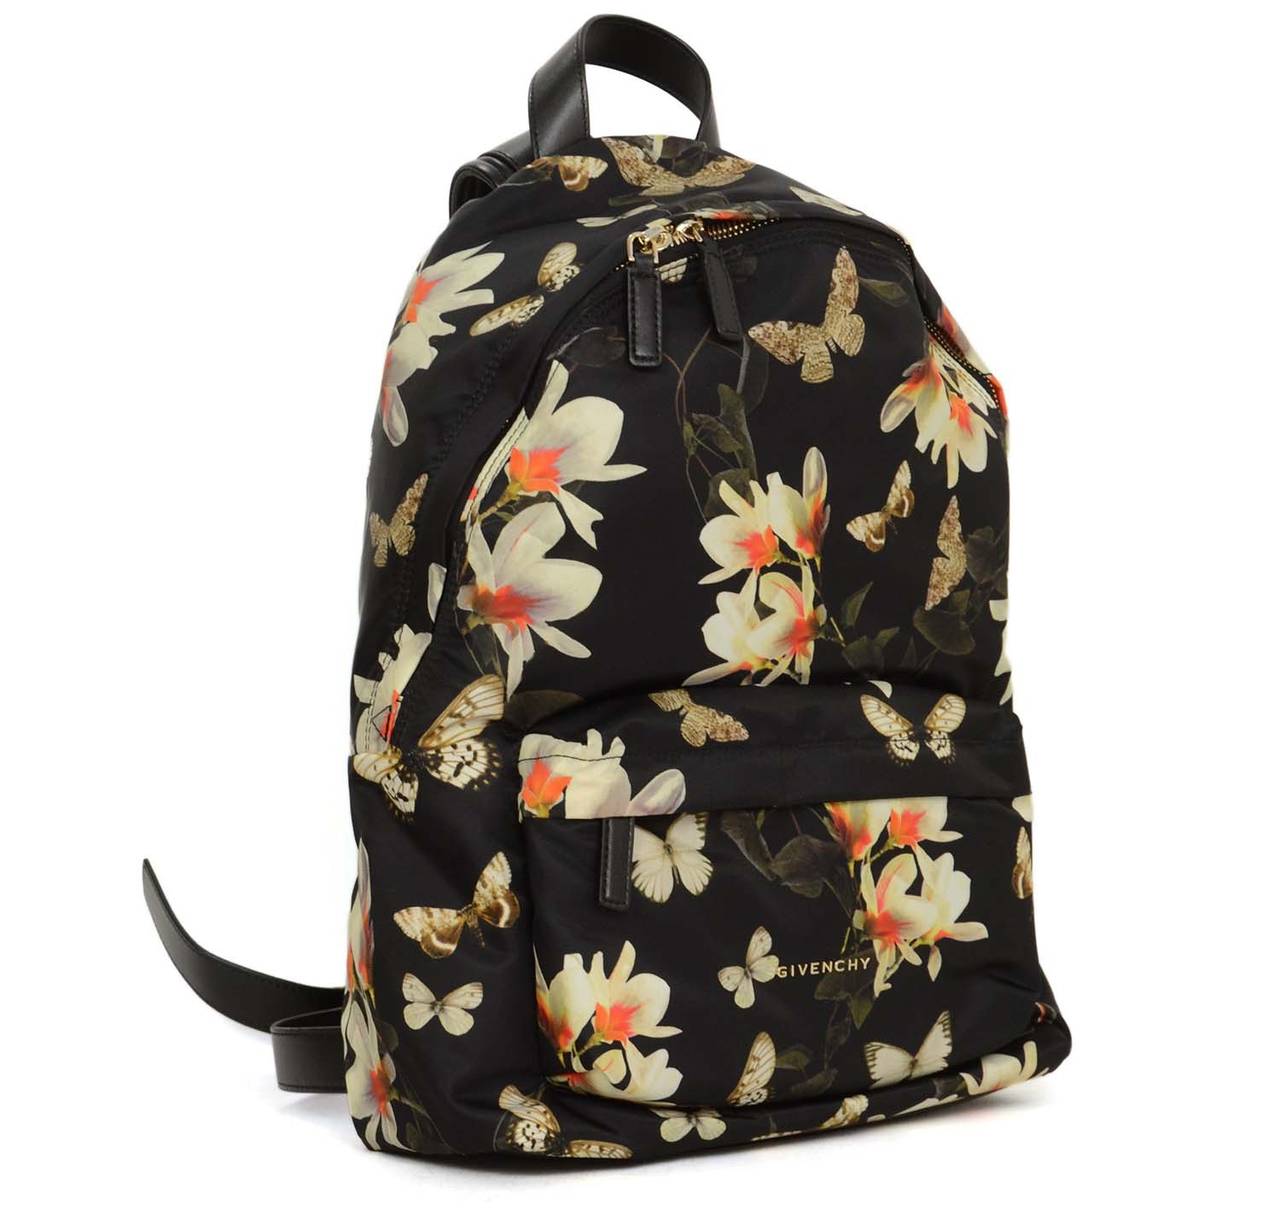 Givenchy Floral & Butterfly Print Black Nylon Backpack
Features adjustable leather shoulder straps with silver star stud detailing

    Made in: Romania
    Color: Black, off-white, red and orange
    Hardware: Silvertone
    Materials: Nylon,